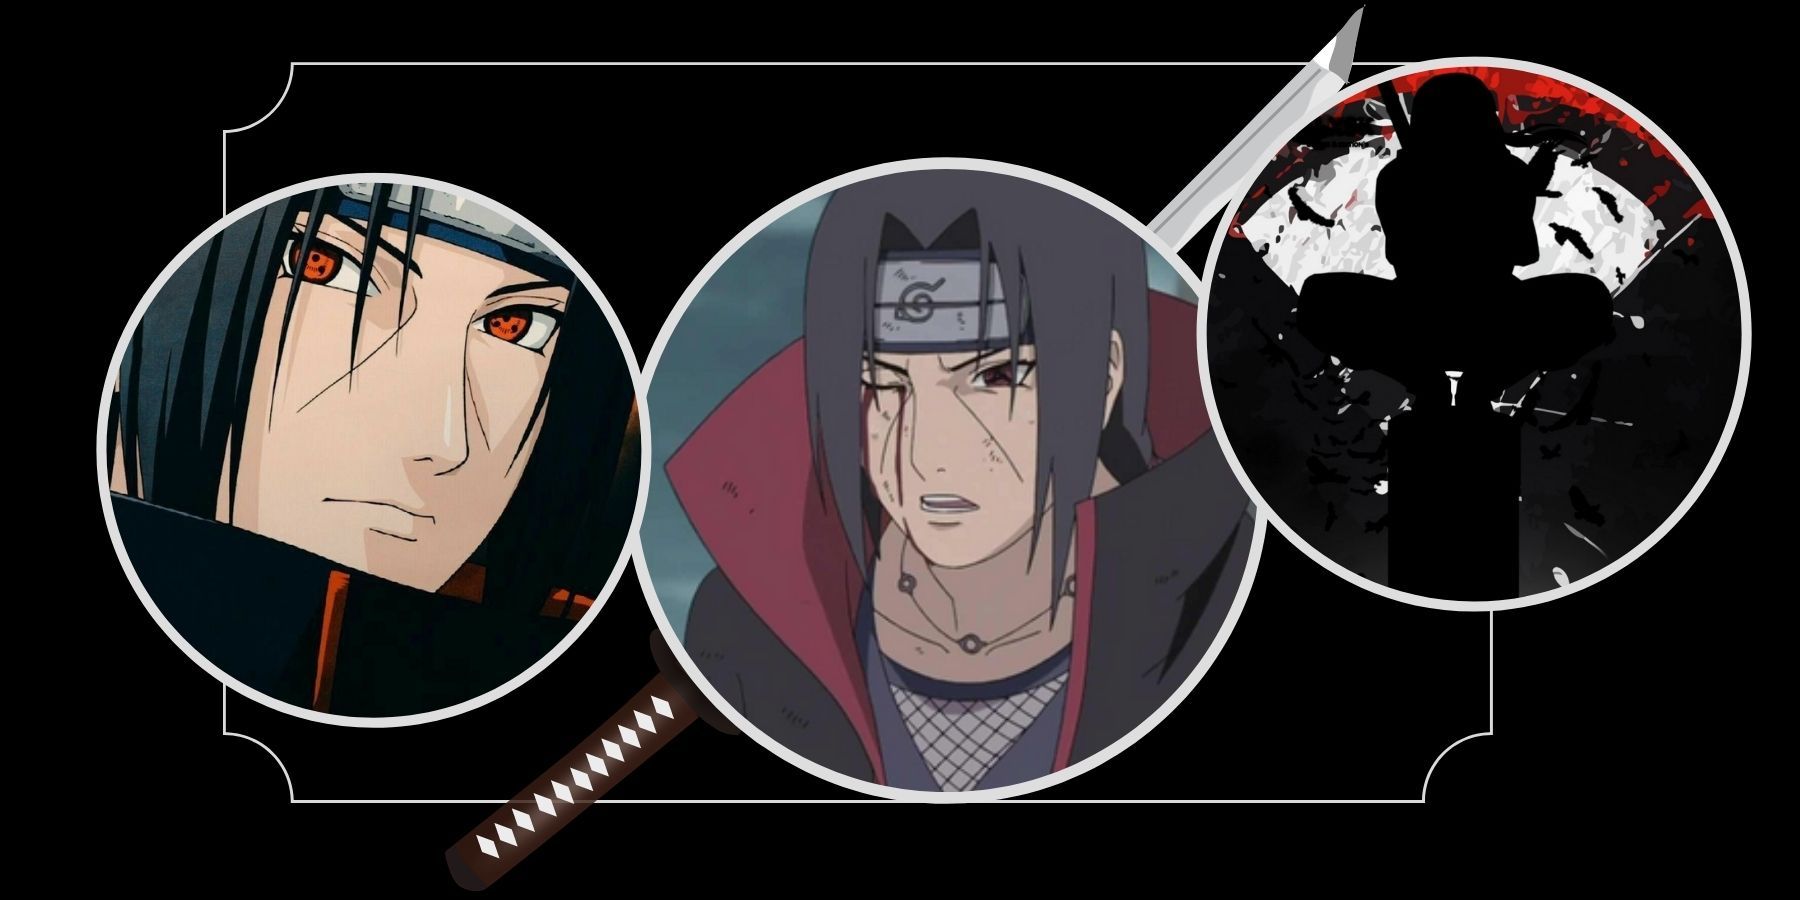 The First Worldwide NARUTO Character Popularity Vote, NARUTOP99, Is Now  Open and Accepting Votes from Fans All Over!